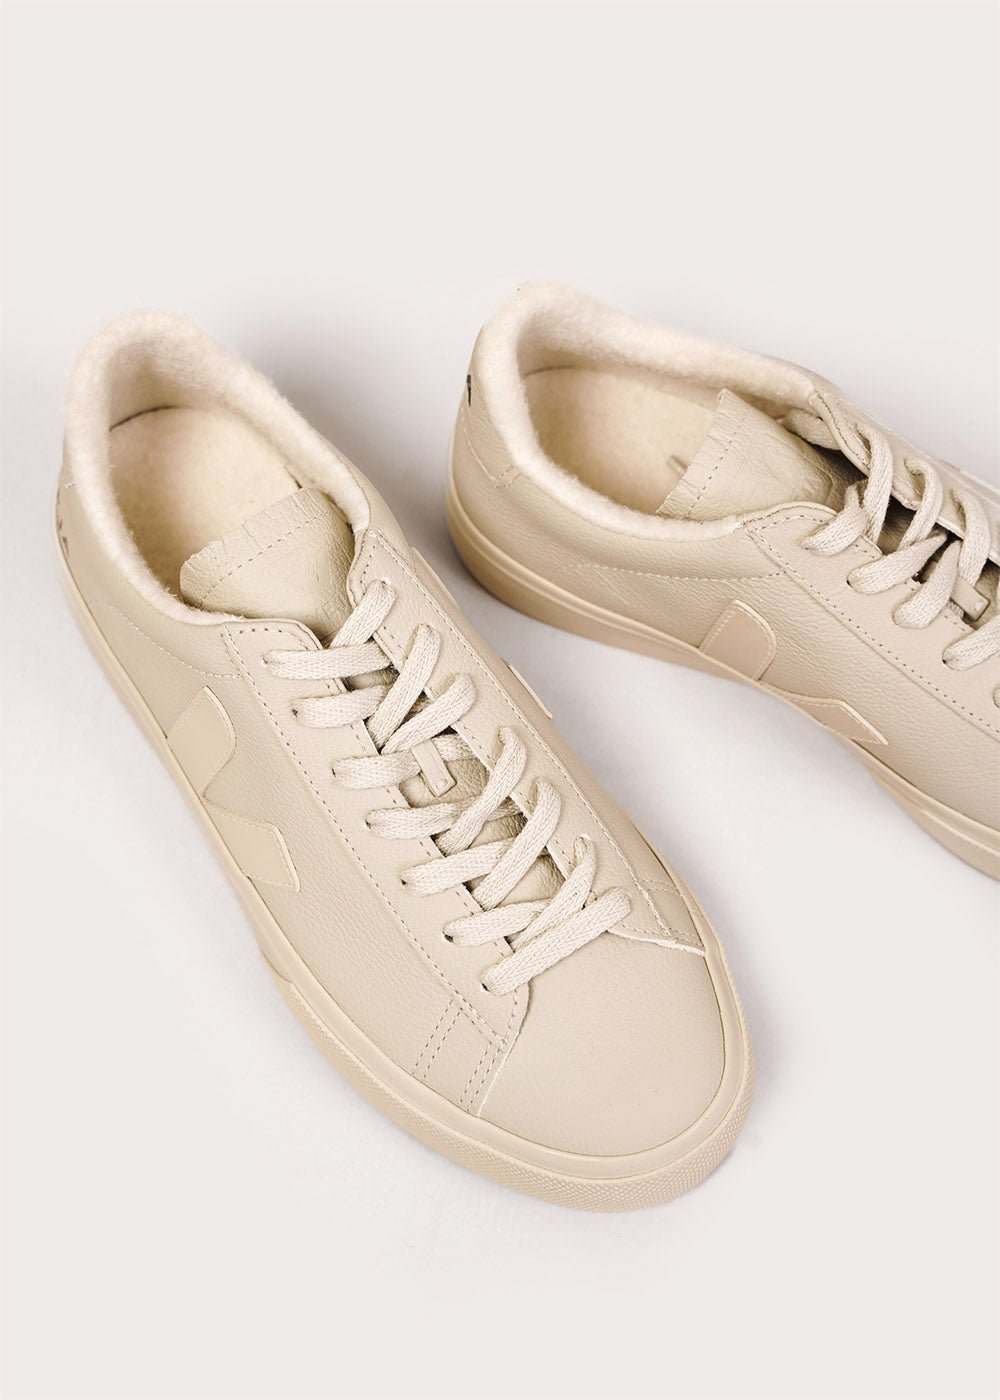 Veja Full Winter Campo Sneakers - New Classics Studios Sustainable Ethical Fashion Canada